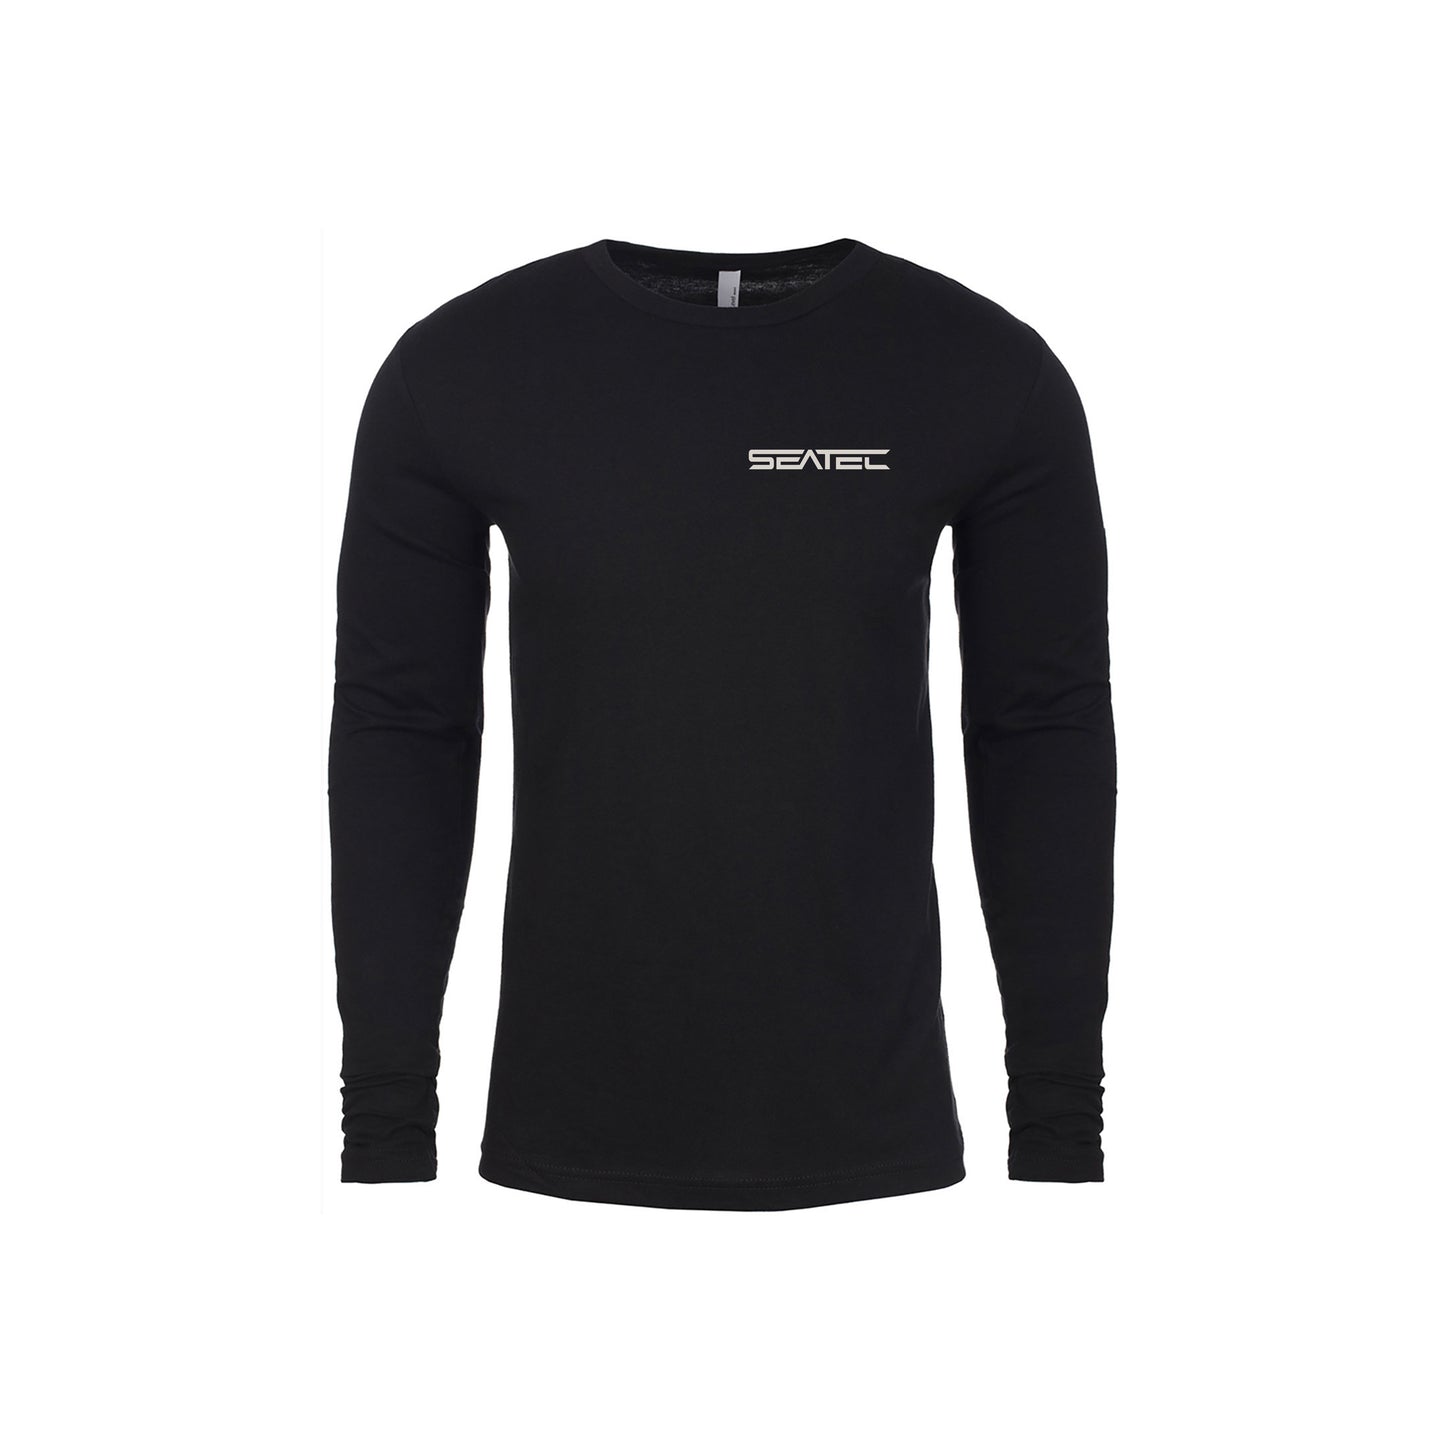 Seatec Outfitters Fly Long Sleeve Performance Shirt - UPF 50+, Snag ...